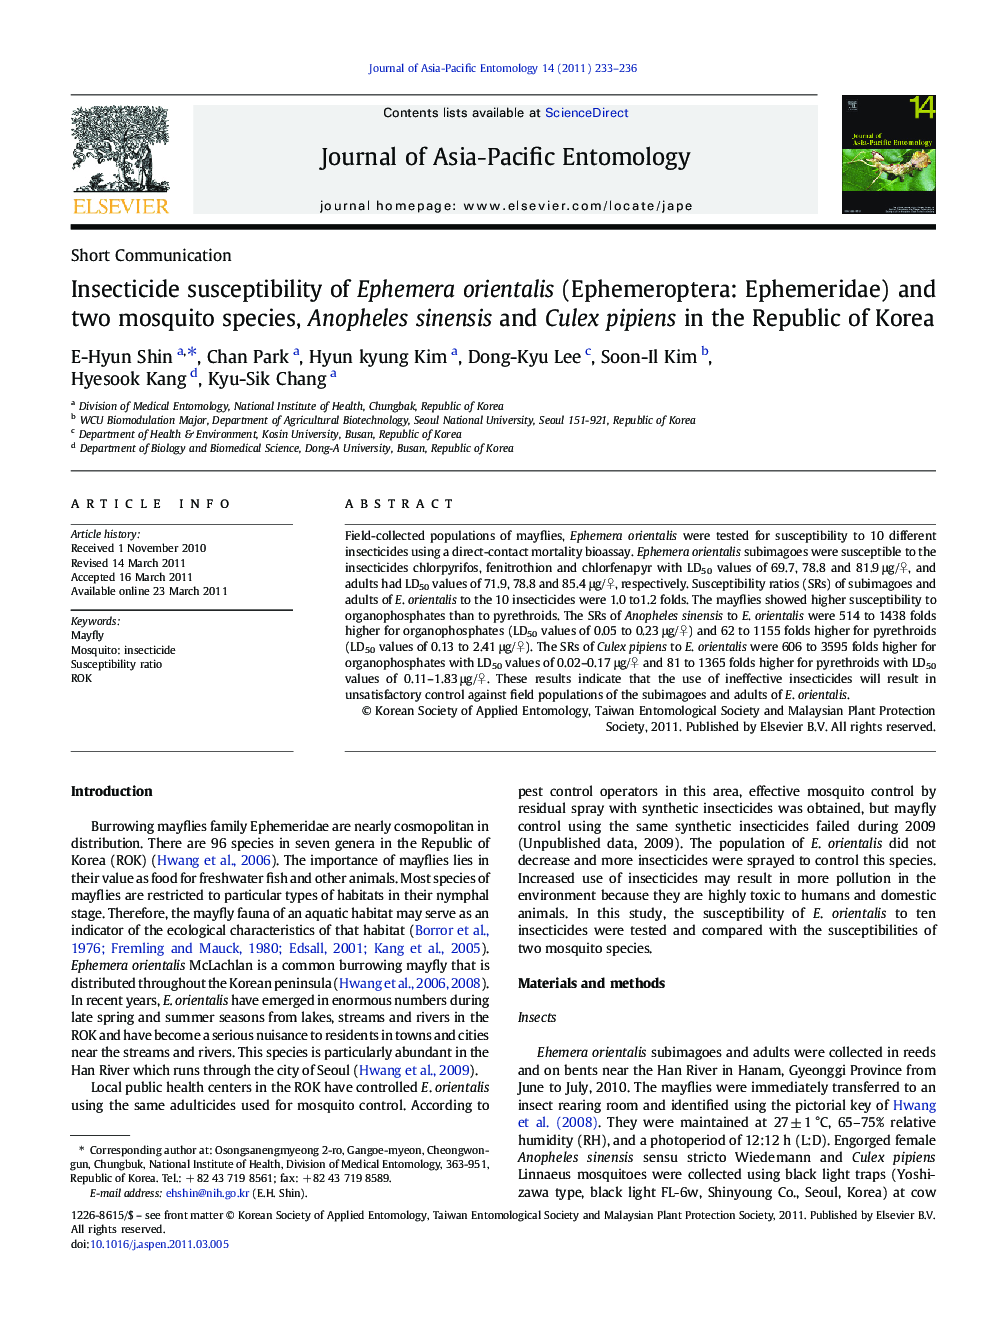 Insecticide susceptibility of Ephemera orientalis (Ephemeroptera: Ephemeridae) and two mosquito species, Anopheles sinensis and Culex pipiens in the Republic of Korea